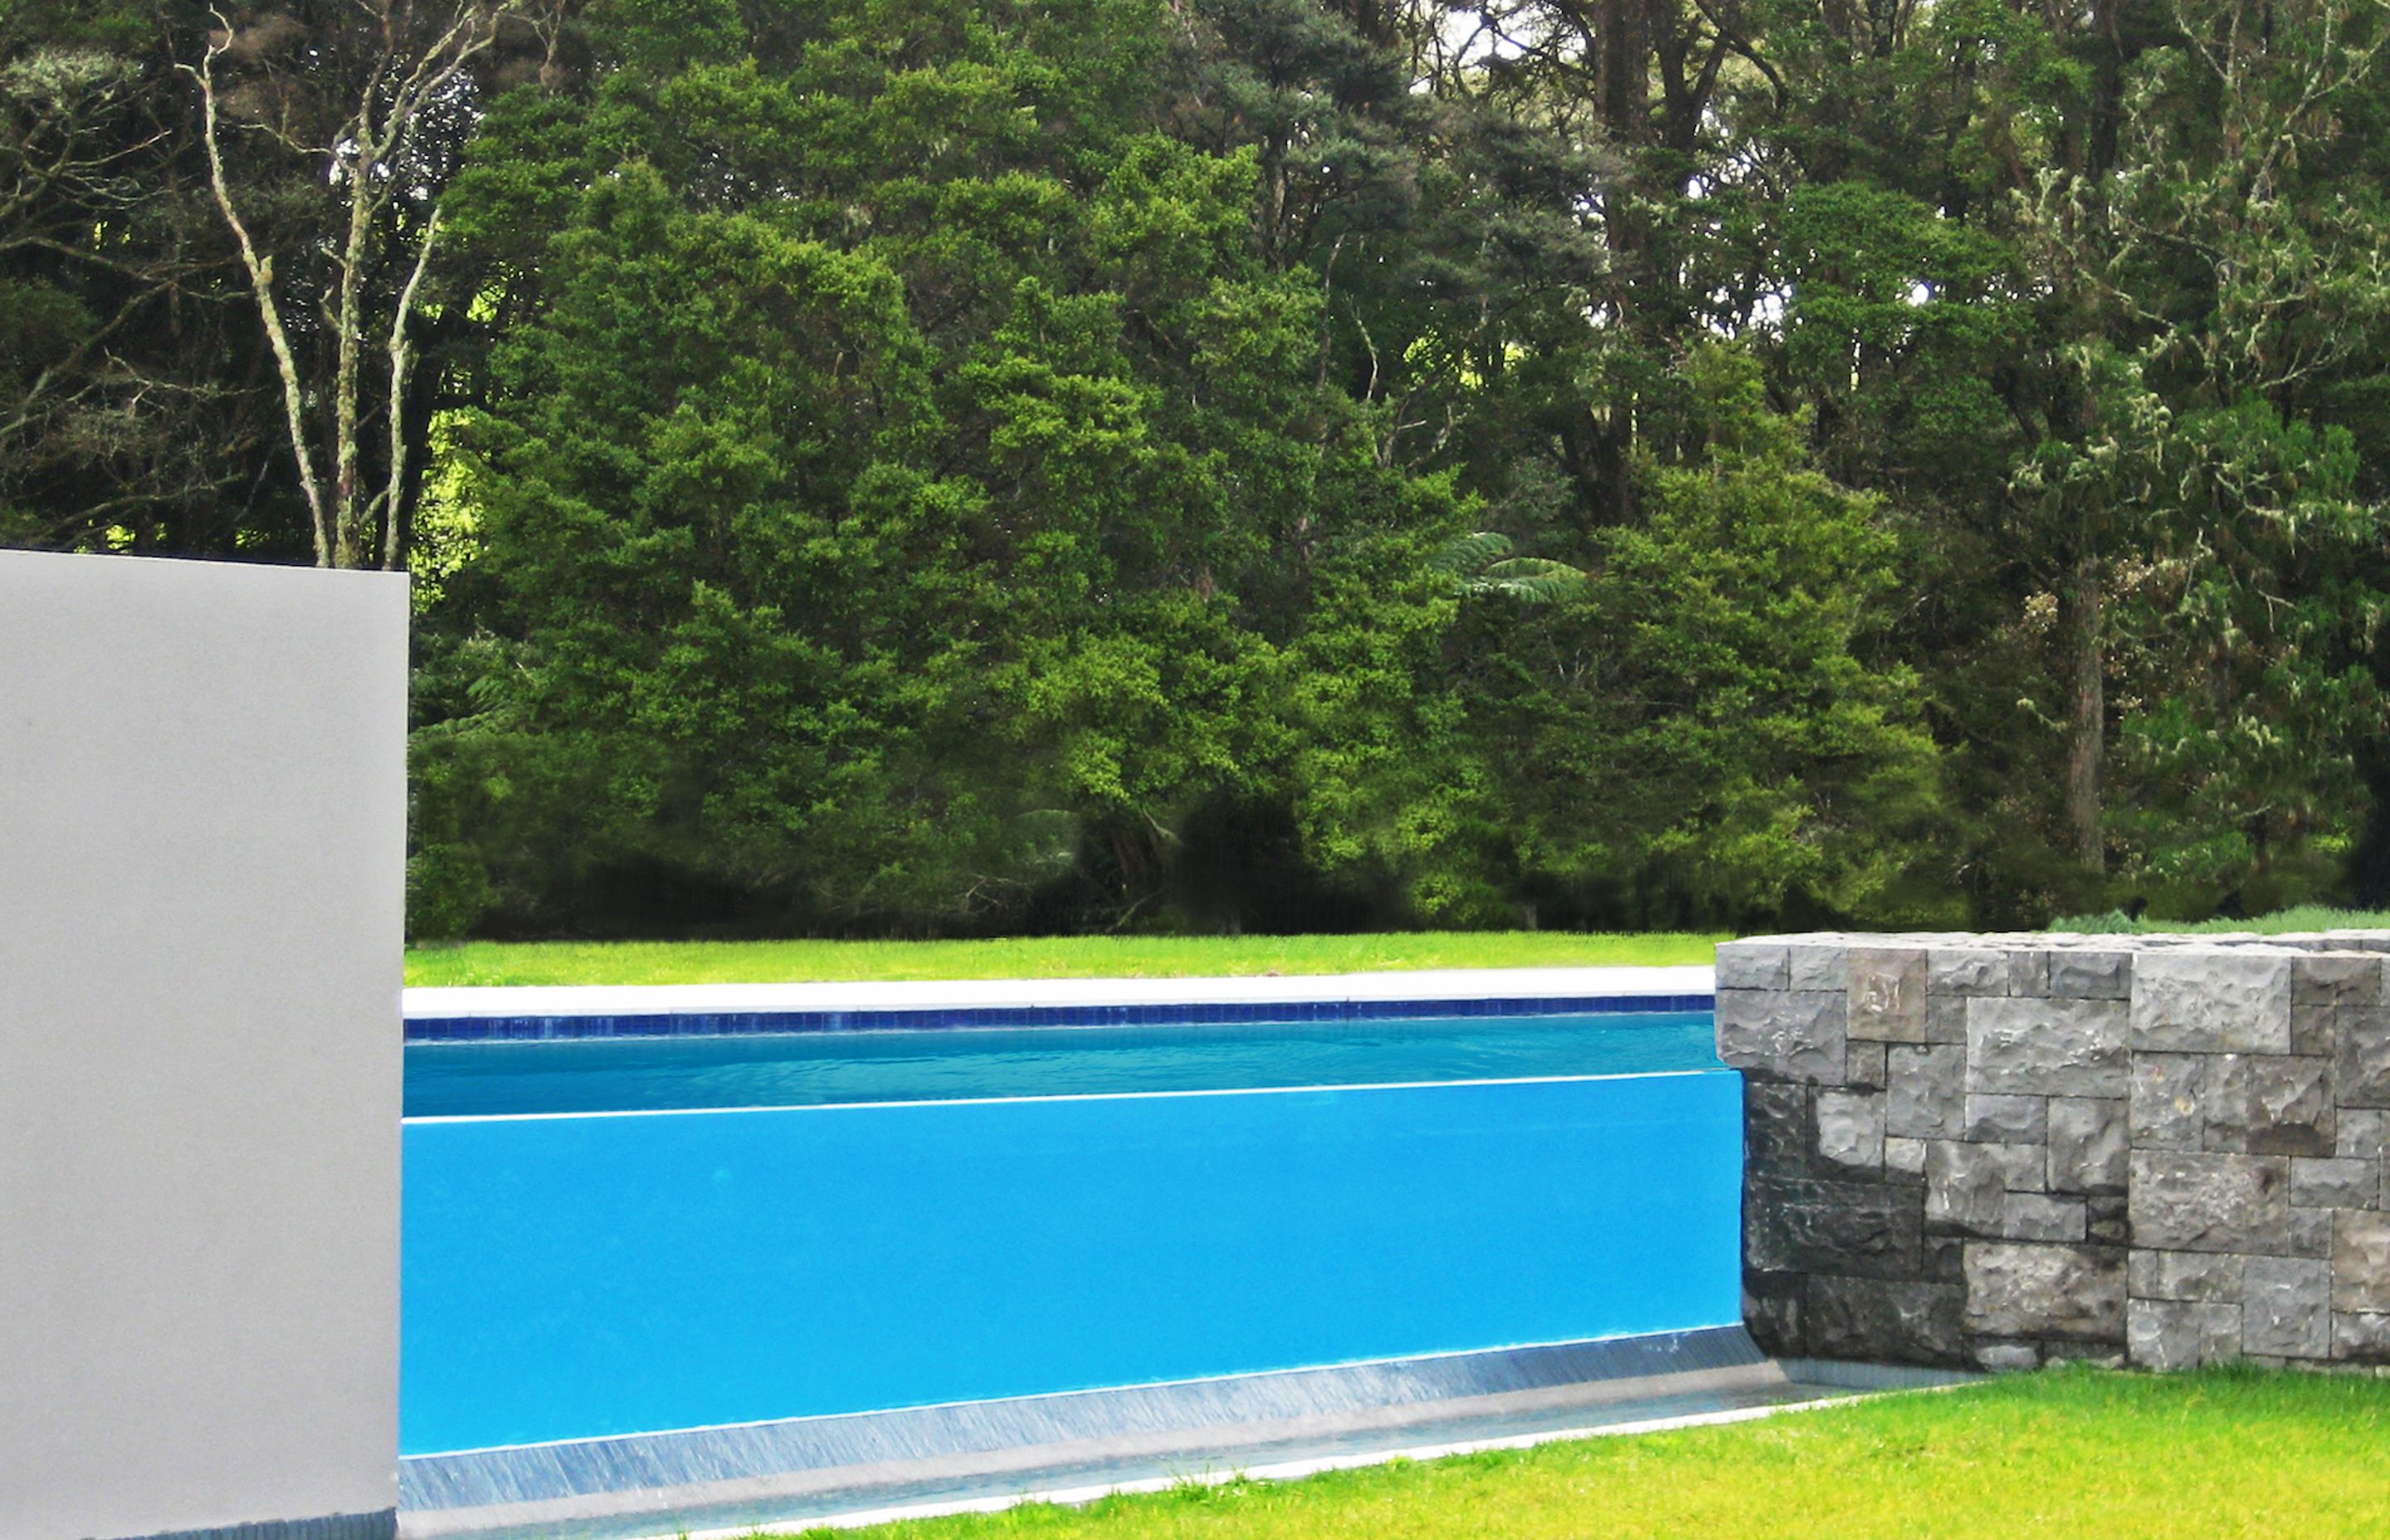 A dramatic glass weir and stone walls  create the pool fencing  and allow this raised level pool to be an absolute feature when viewed from the house